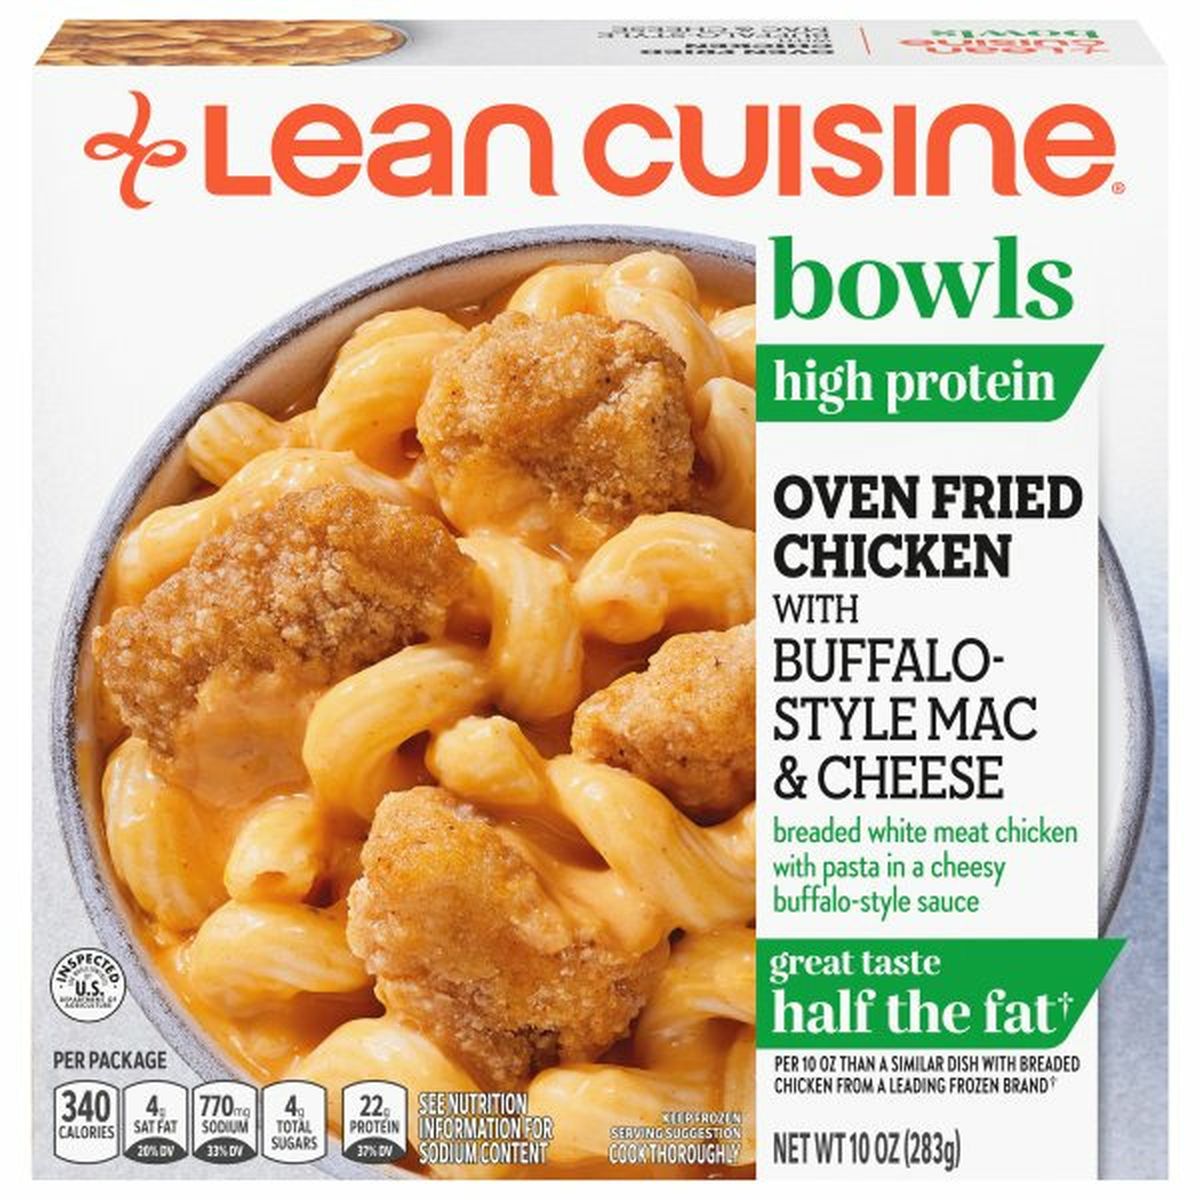 Calories in Lean Cuisine Oven Fried Chicken with Buffalo-Style Mac & Cheese, Bowls